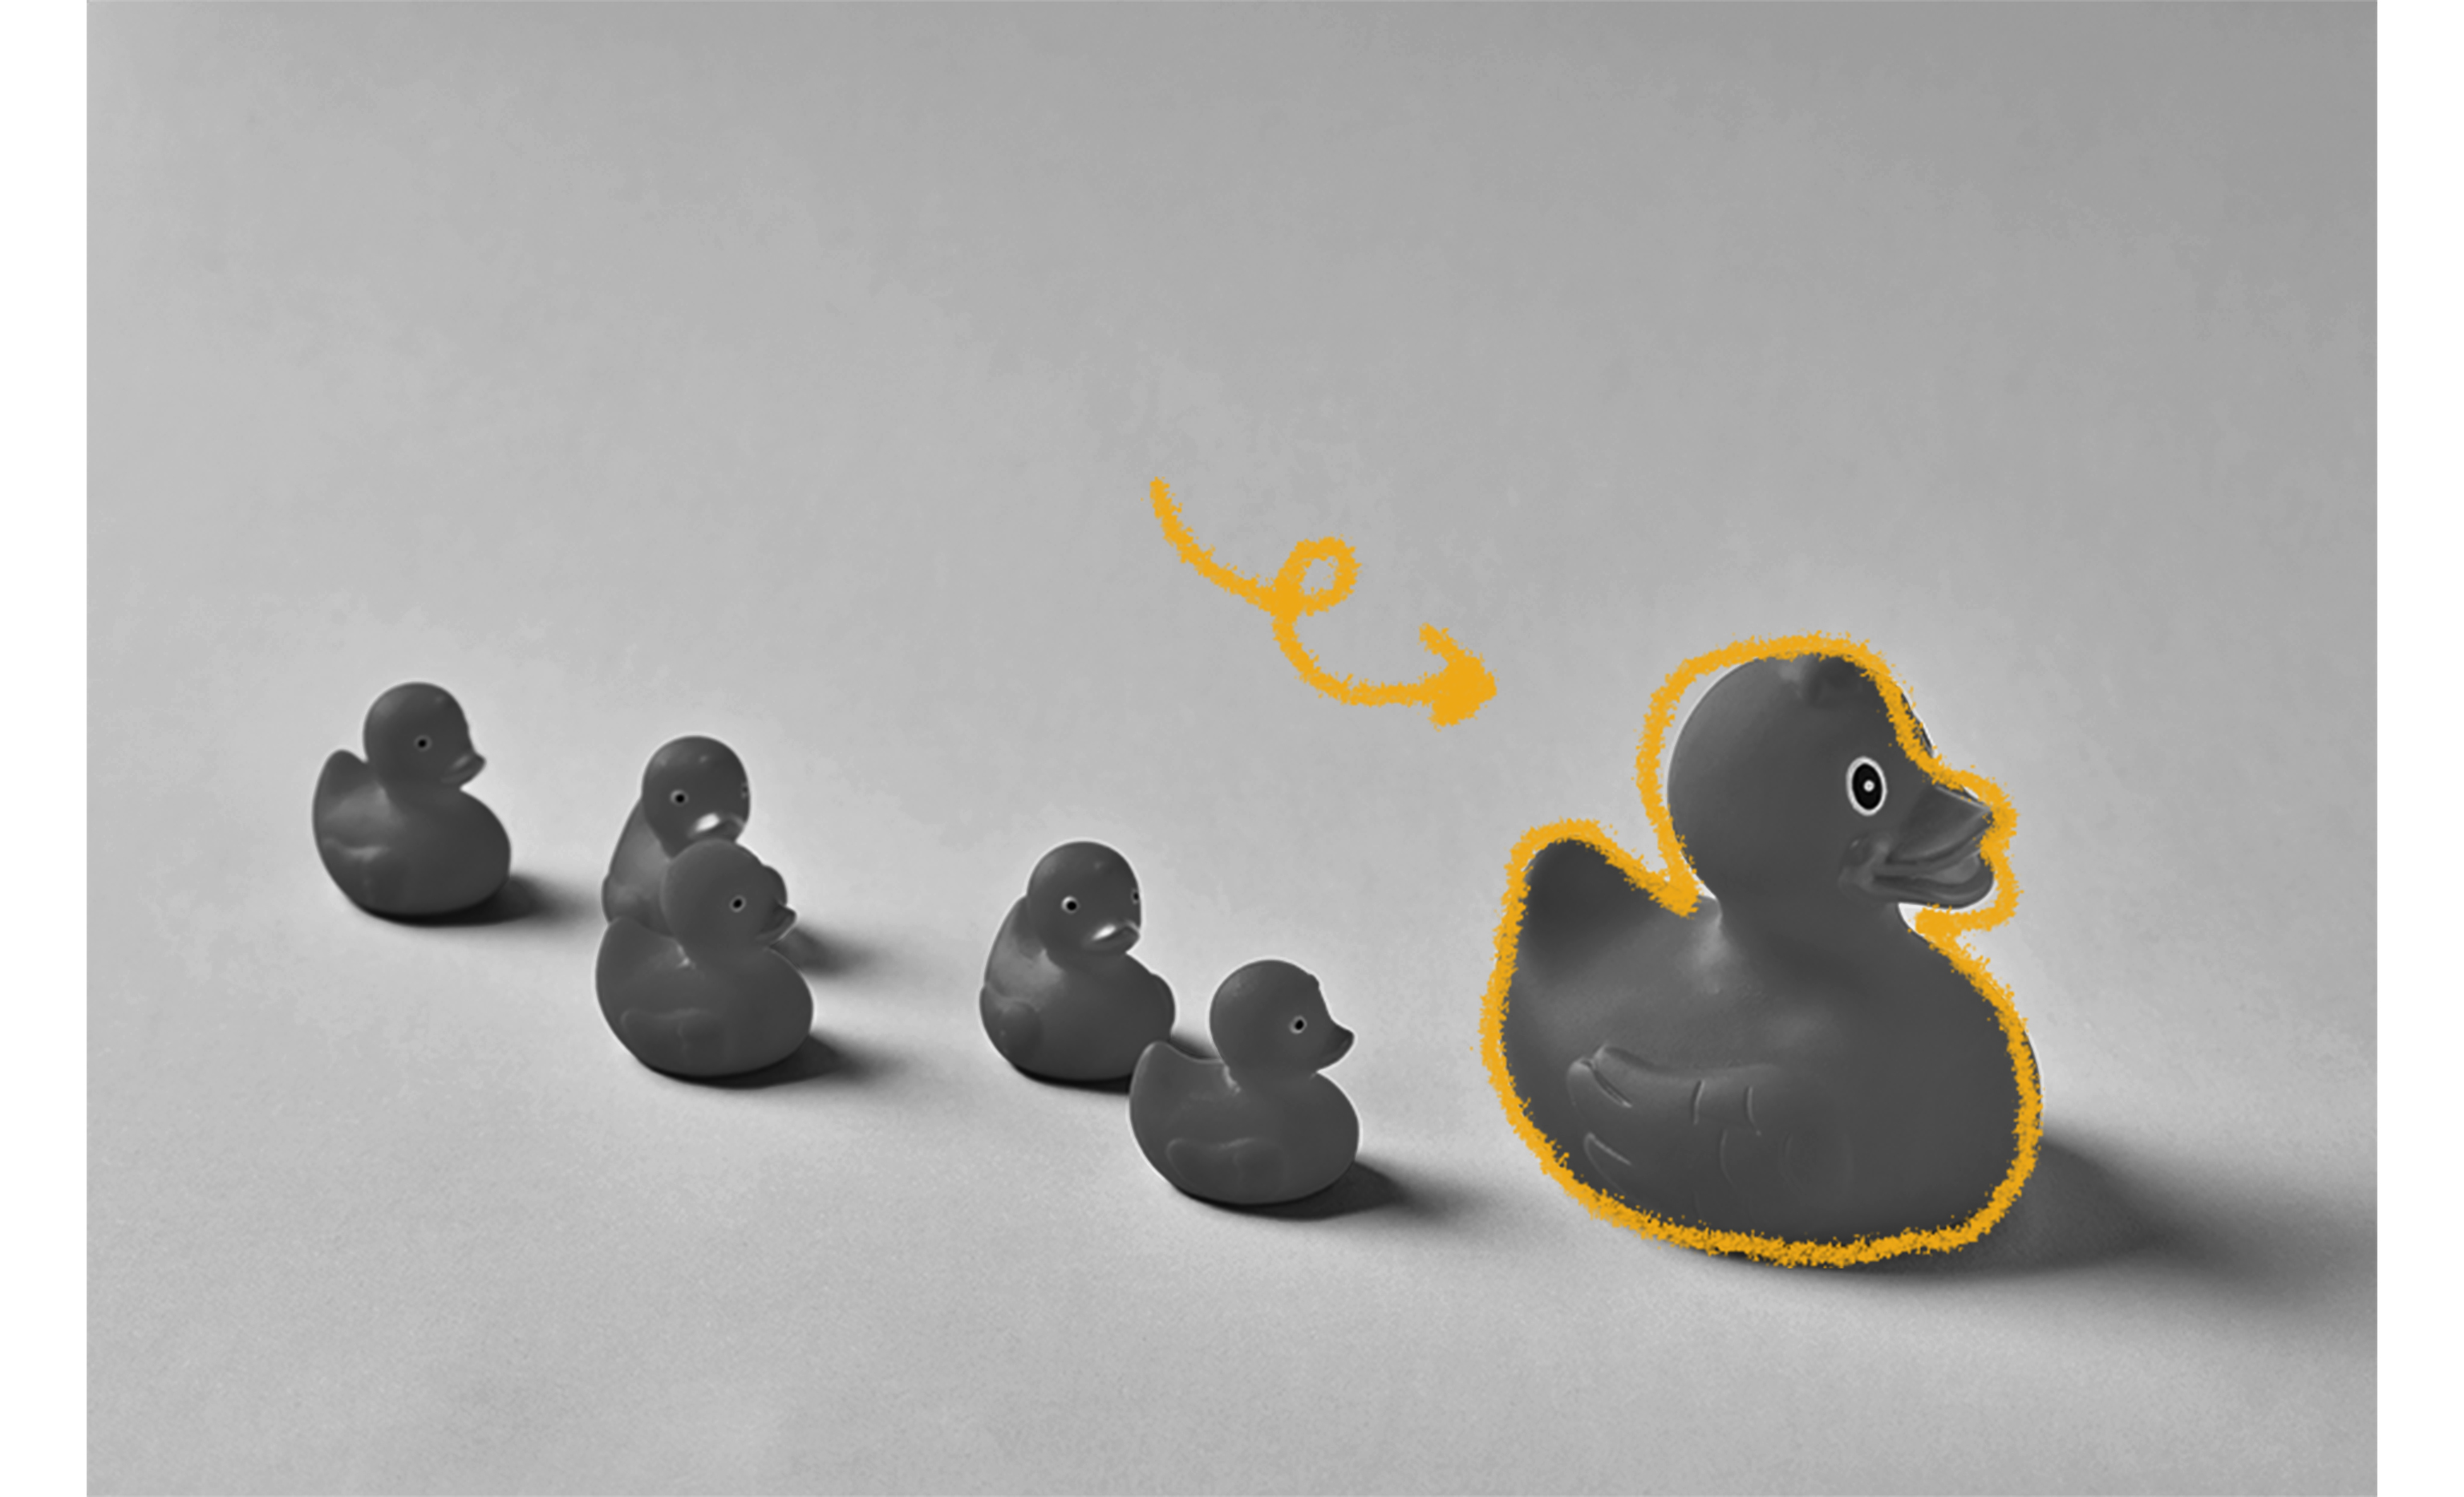 The History of Rubber Duckies